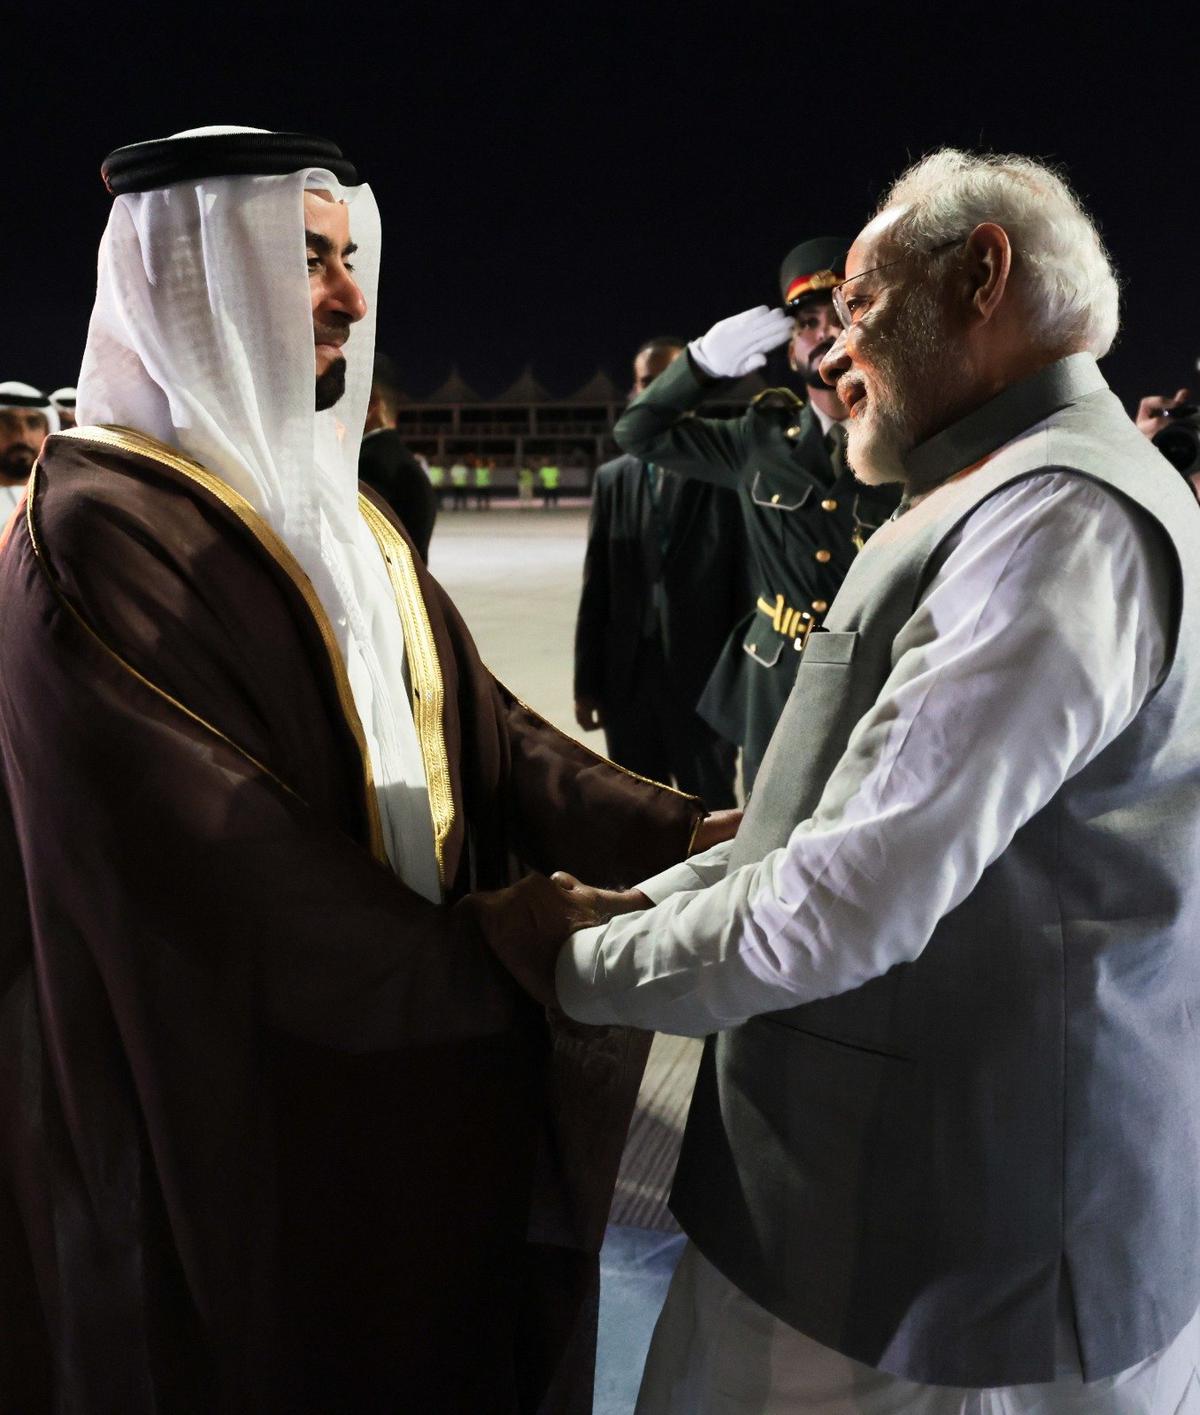 Prime Minister Modi Lands in UAE for World Climate Action Summit